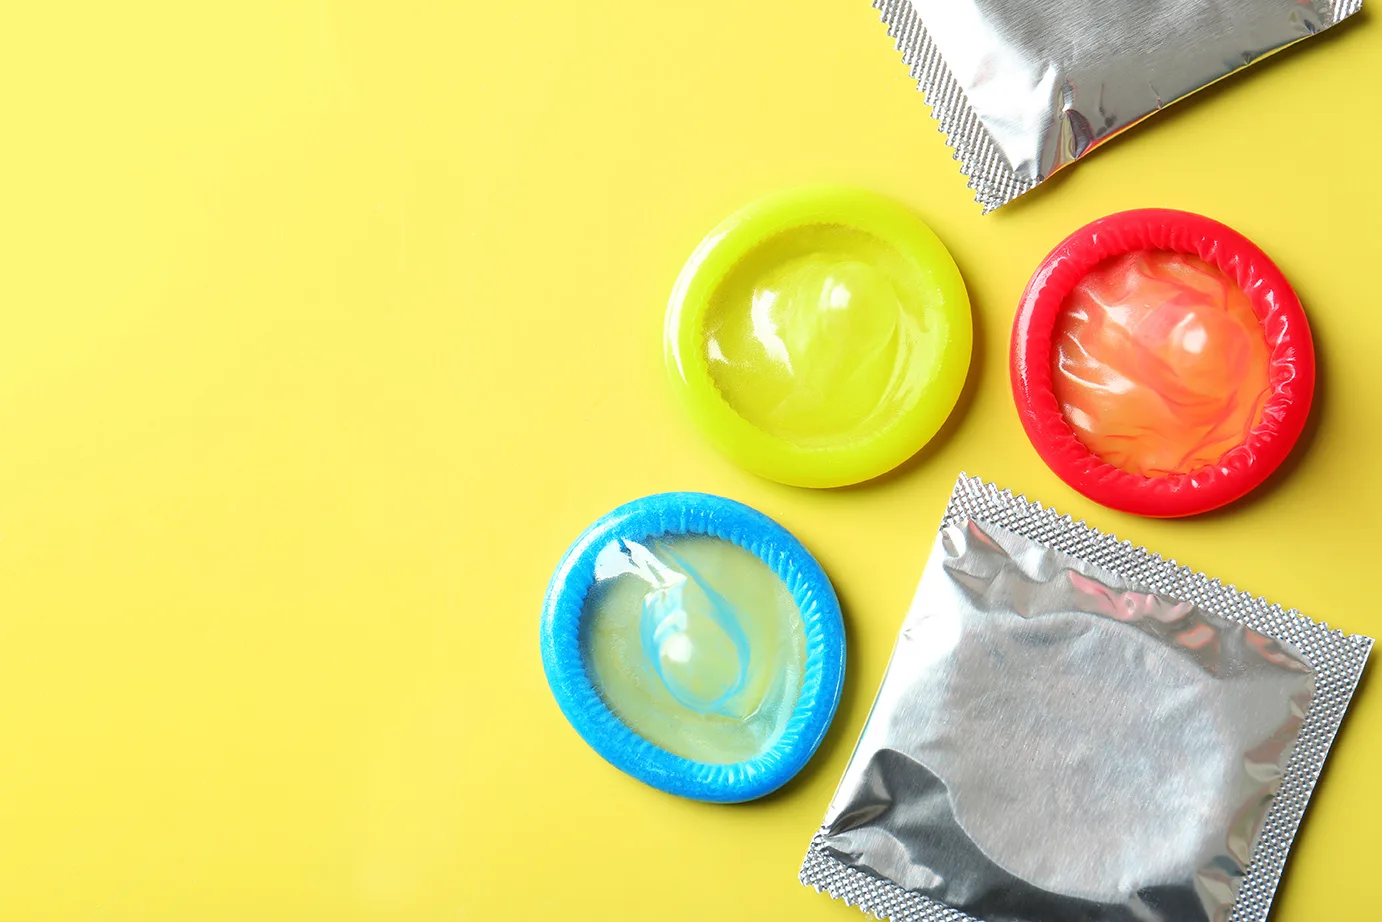 How Quickly Can You Get Pregnant if You've Been Using Condoms as Birth Control?